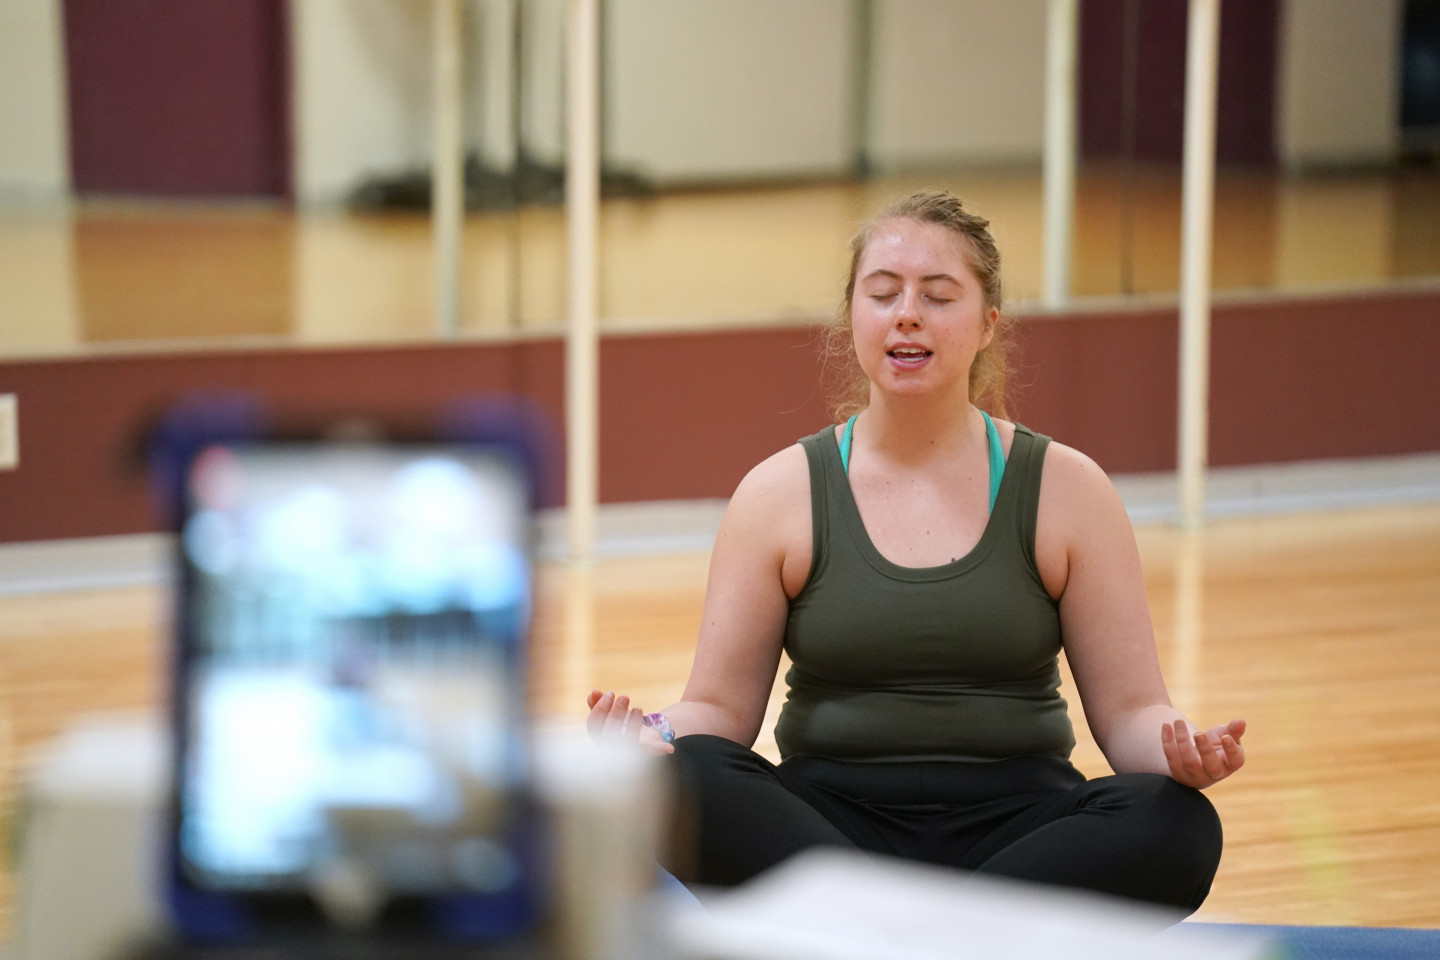 A student does yoga while livestreaming the class on Facebook.